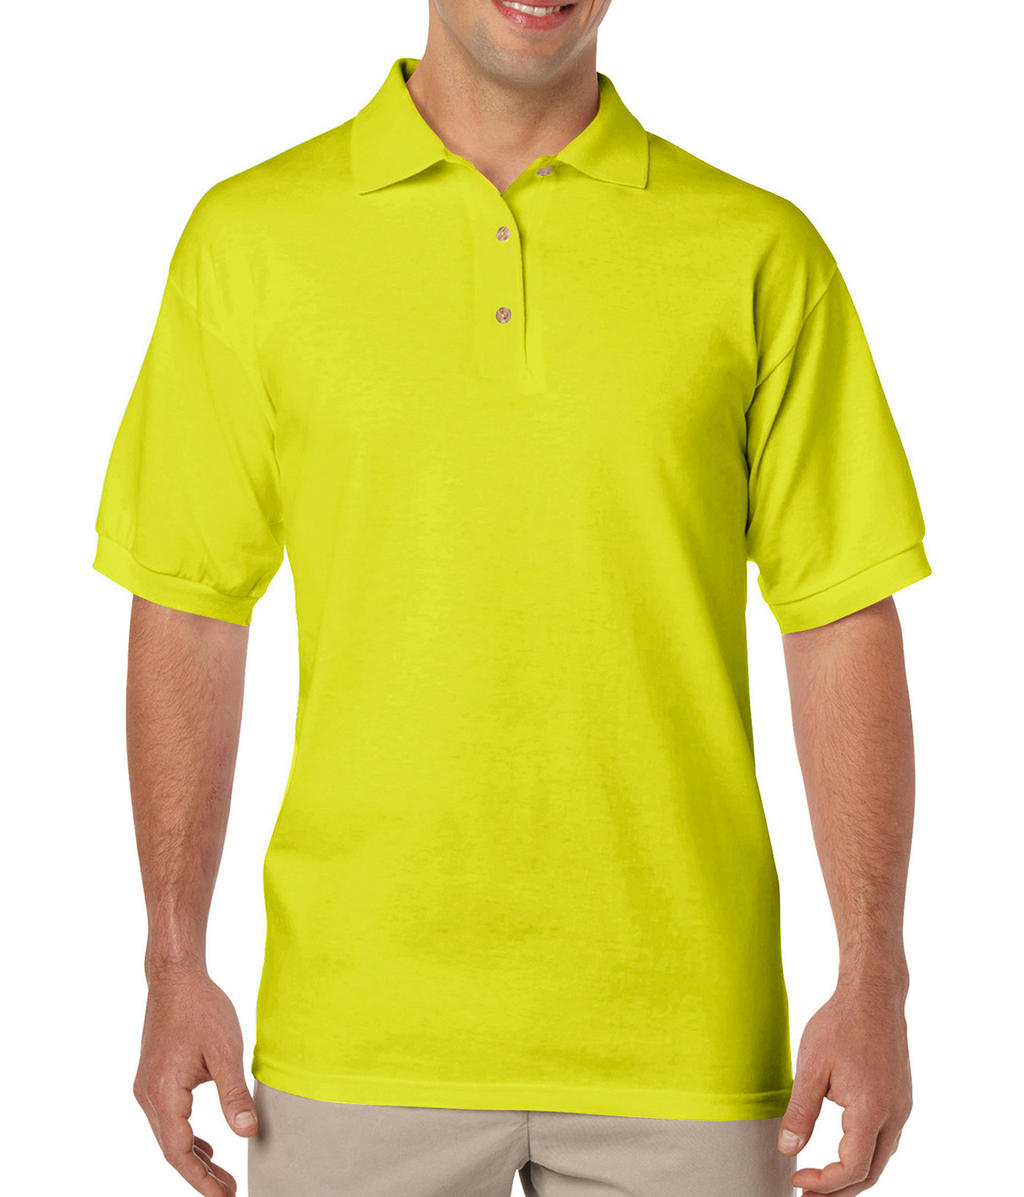  DryBlend Adult Jersey Polo in Farbe Safety Green